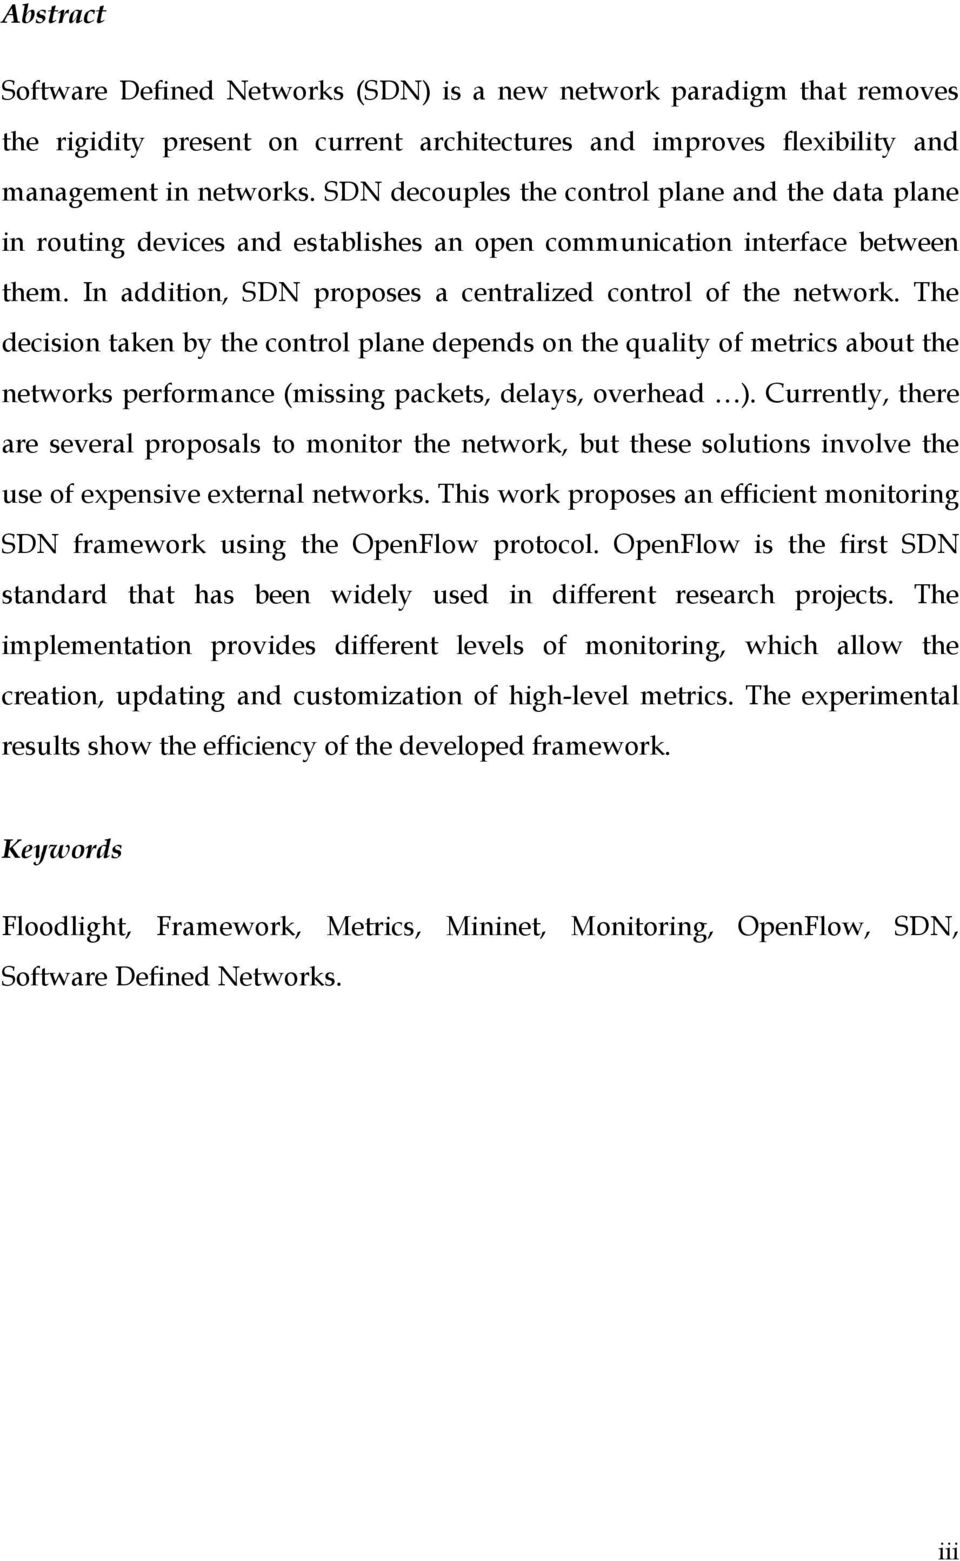 The decision taken by the control plane depends on the quality of metrics about the networks performance (missing packets, delays, overhead ).